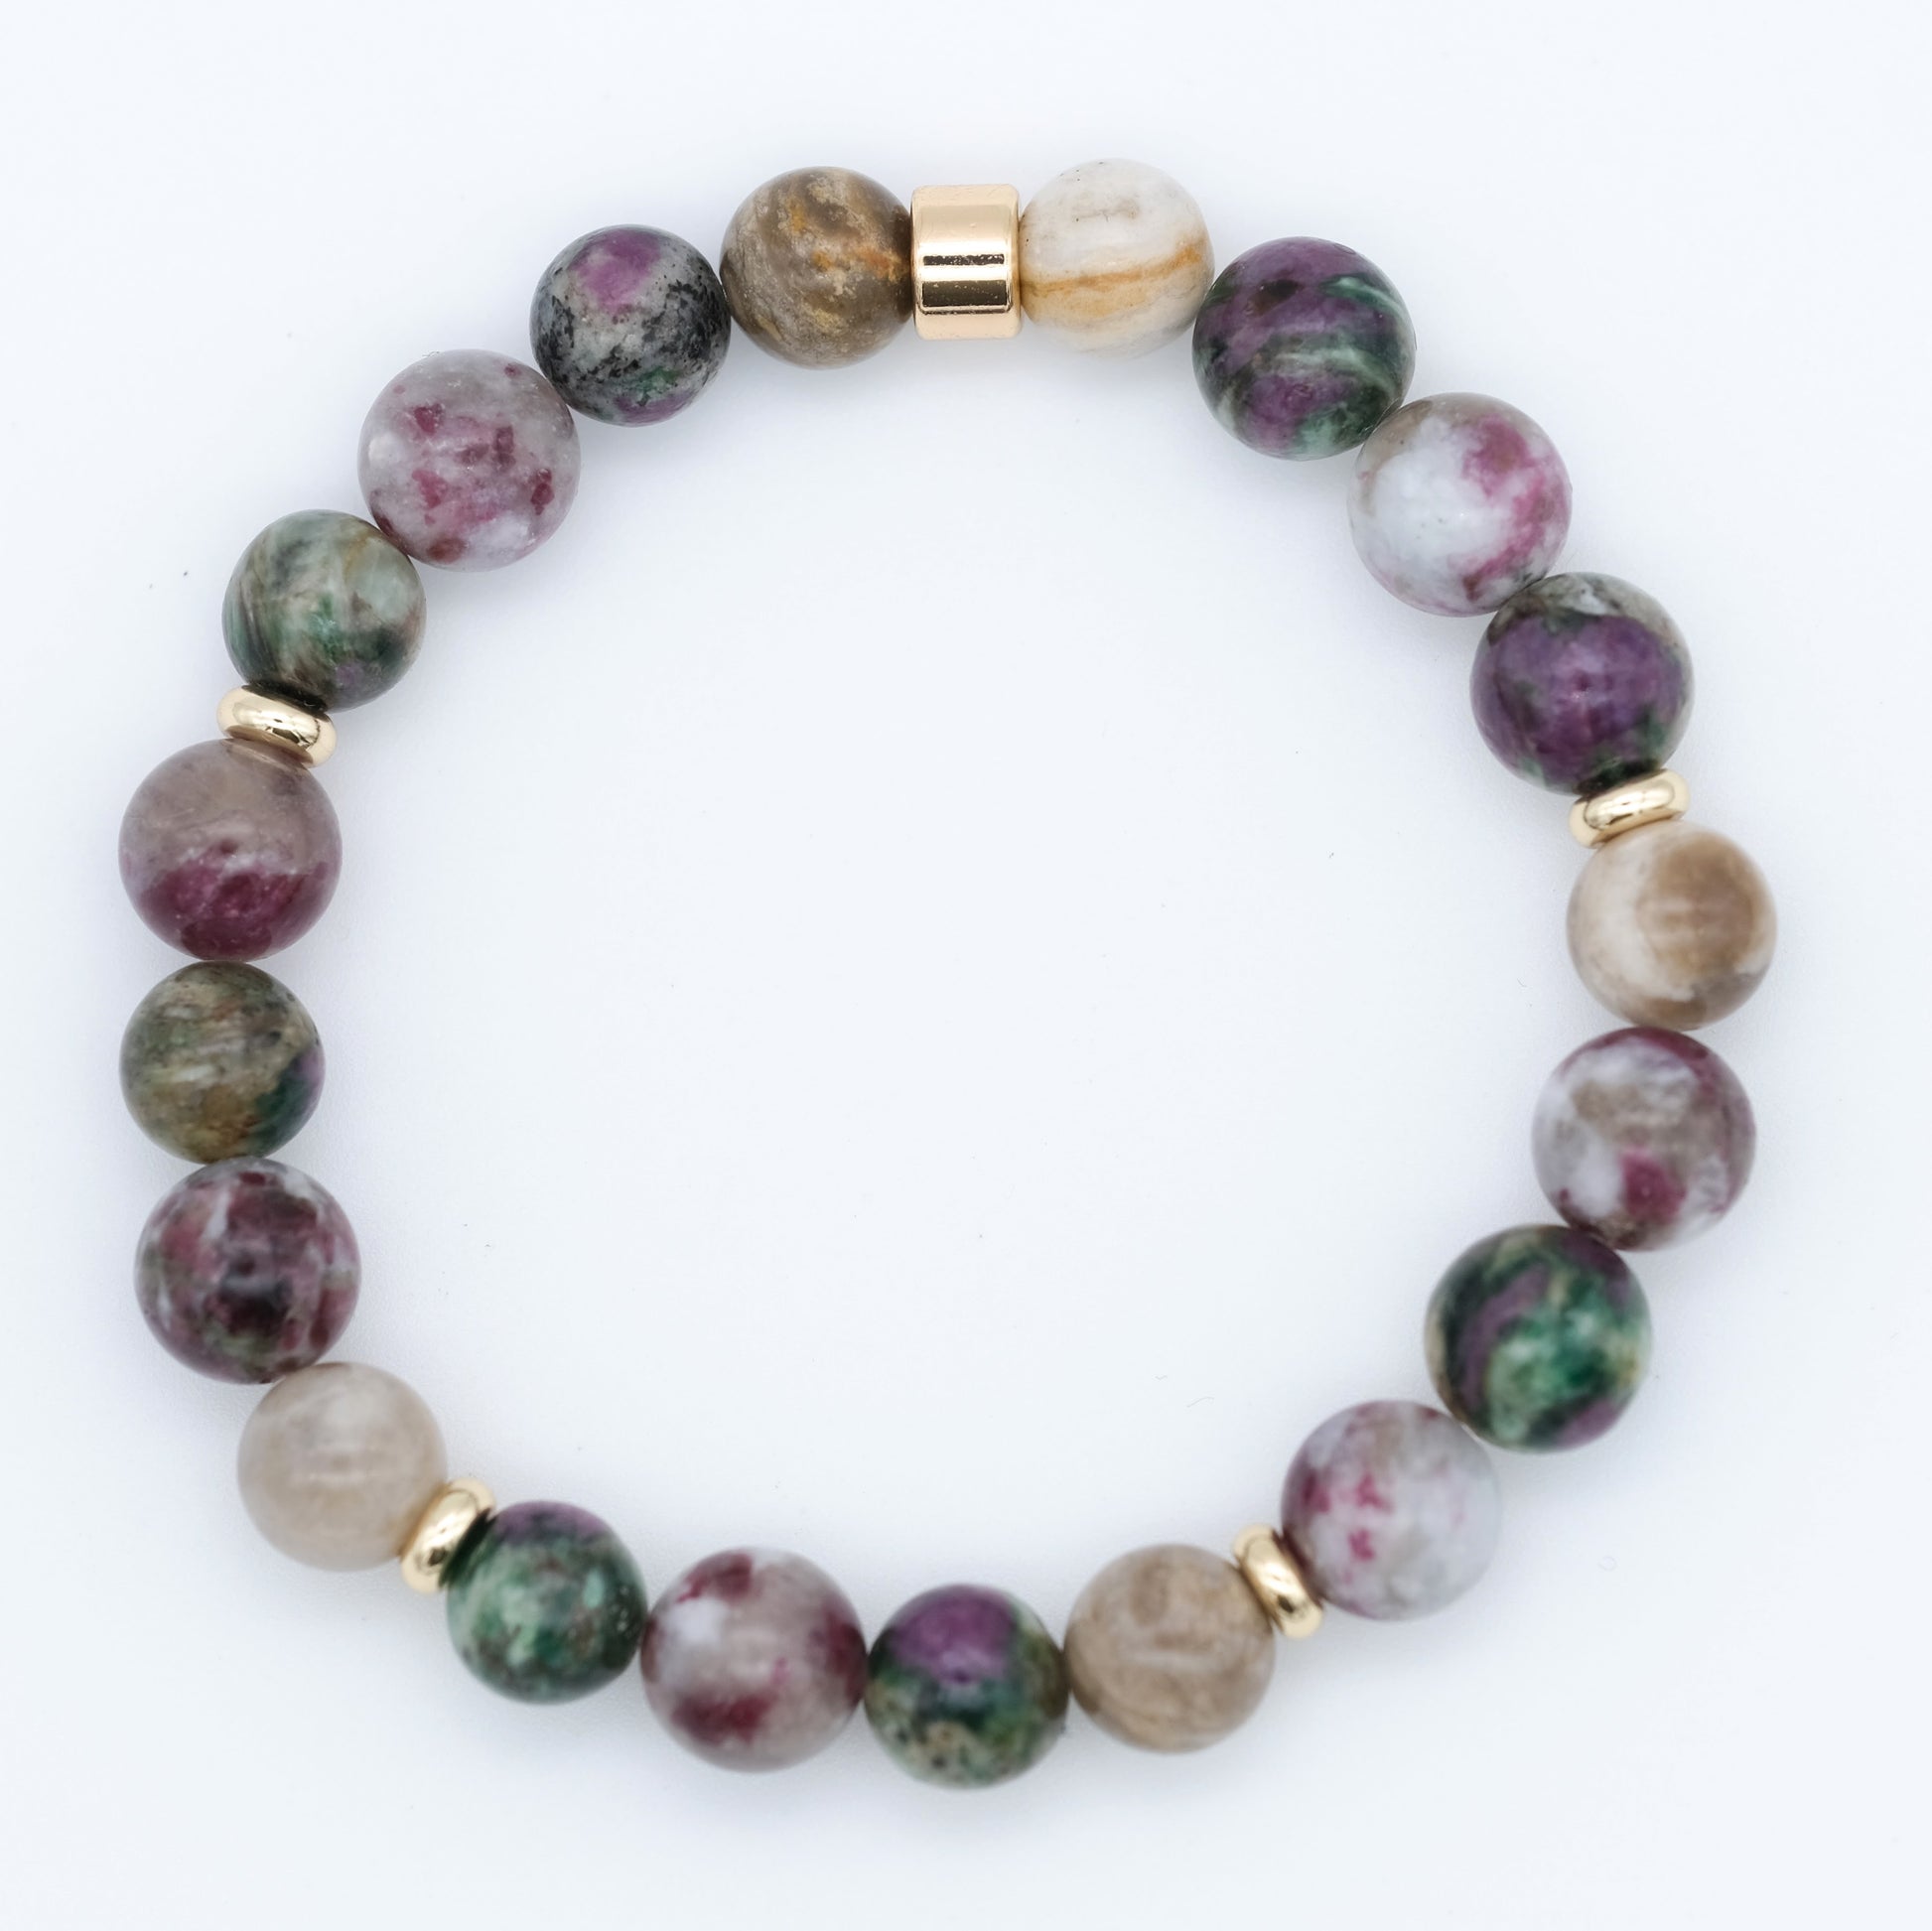 Tourmaline, silver leaf and green lepidolite gemstone bracelet with gold filled accessories from above